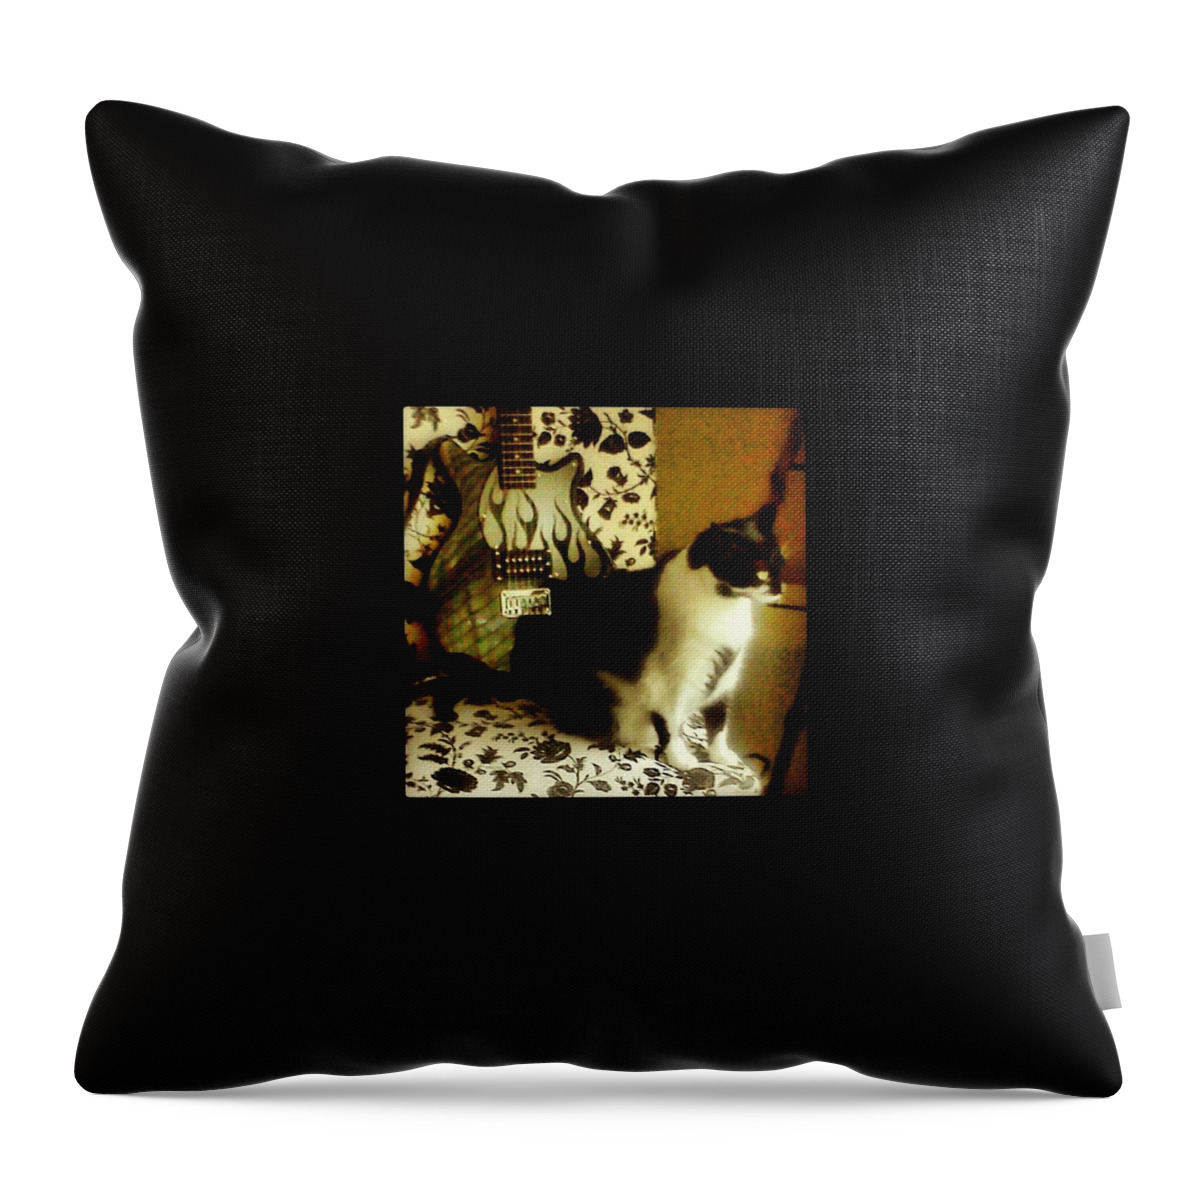 Guitar Throw Pillow featuring the photograph Got The Blues by Stacy C Bottoms